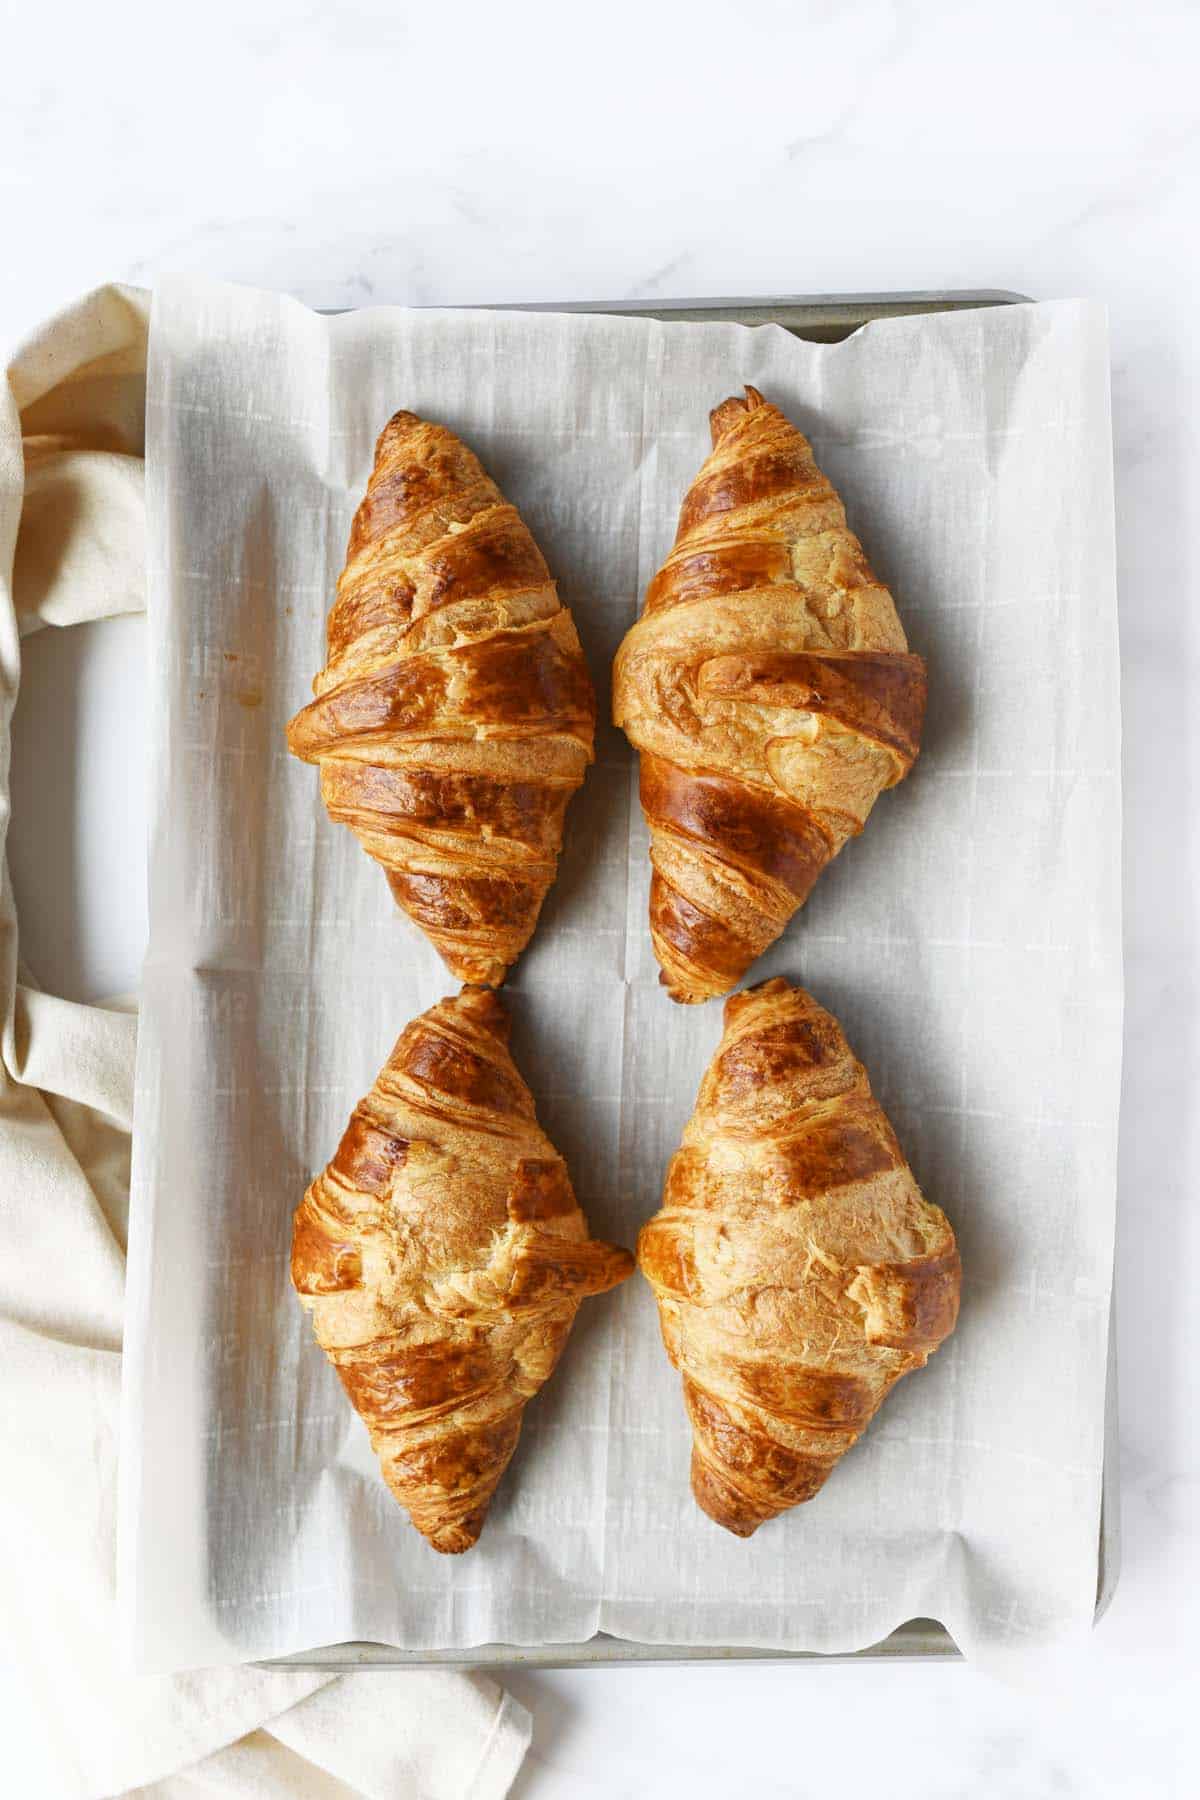 Four baked croissants on a parchment-lined baking sheet.